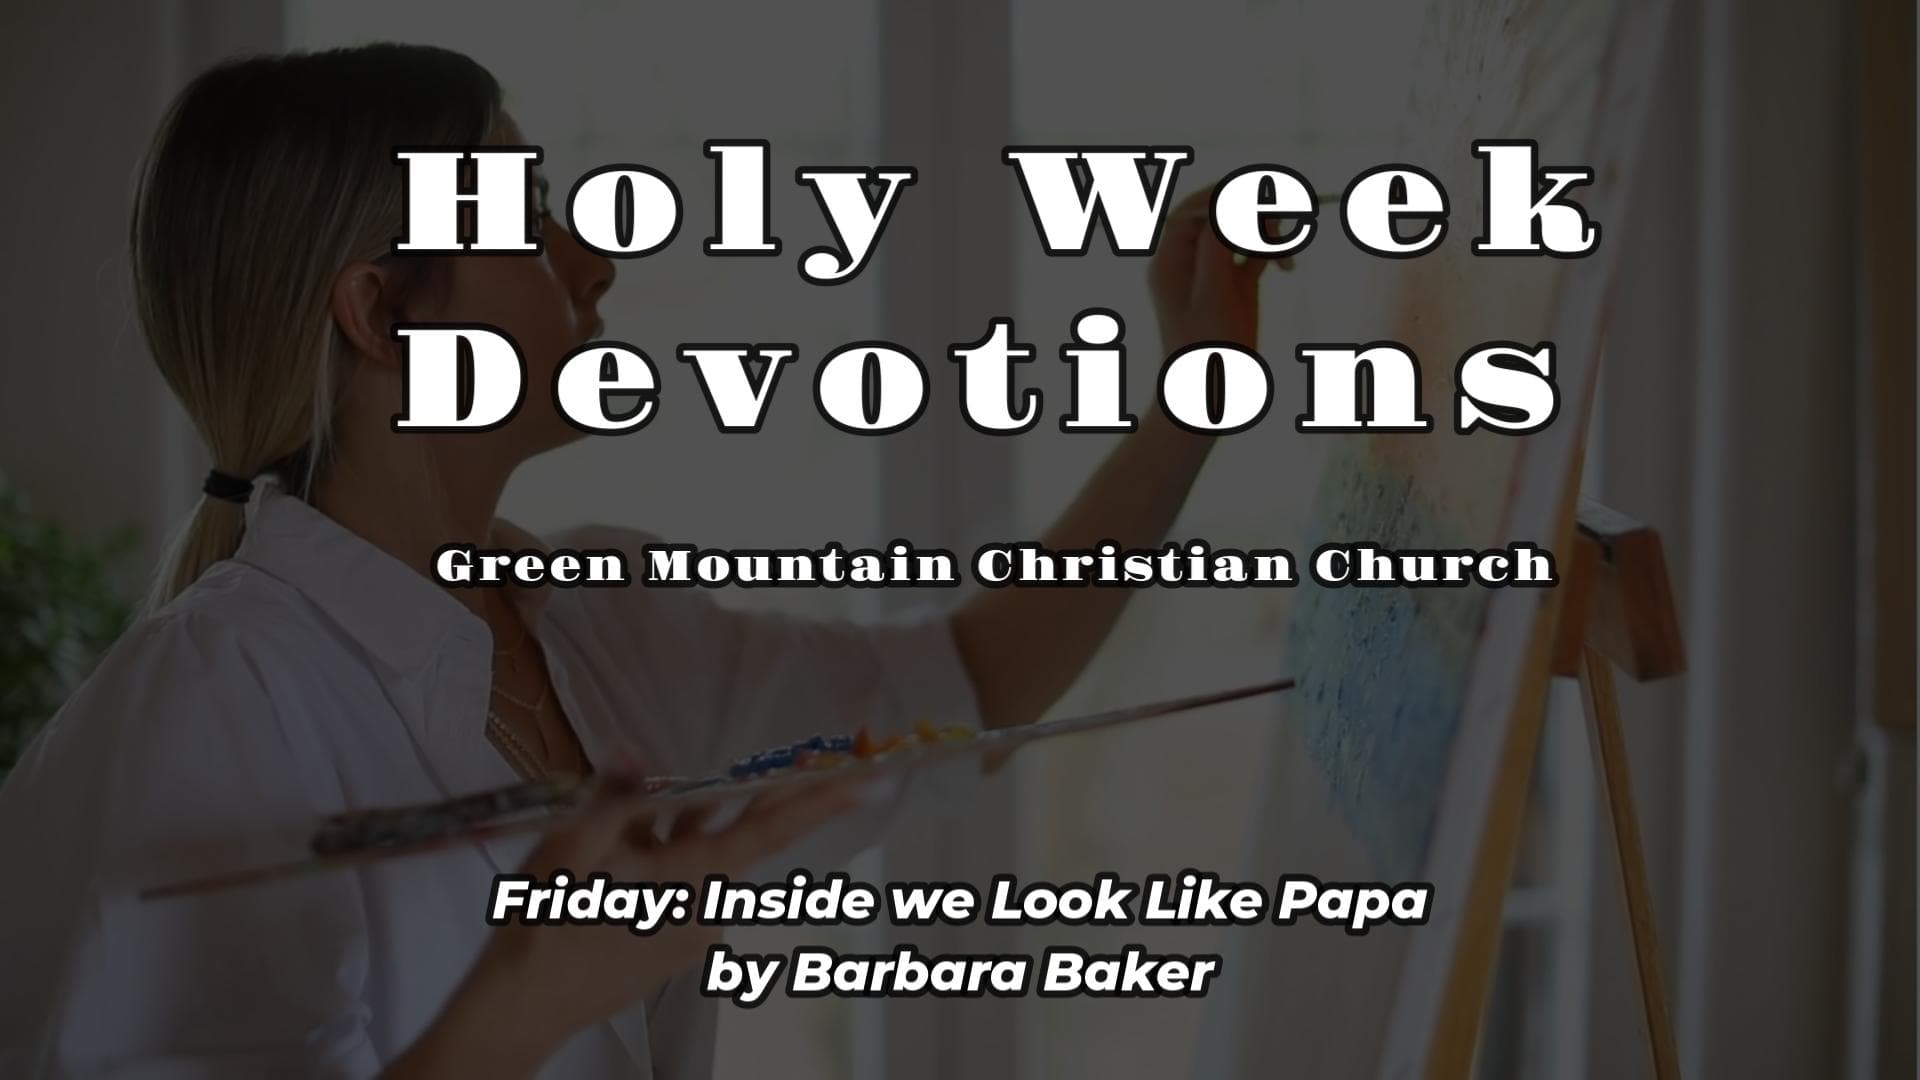 Caption reading "Holy week devotions - Green Mountain Christian Church - Friday: Inside we look like papa by Barbara Baker" over a background of a woman painting on an easel.